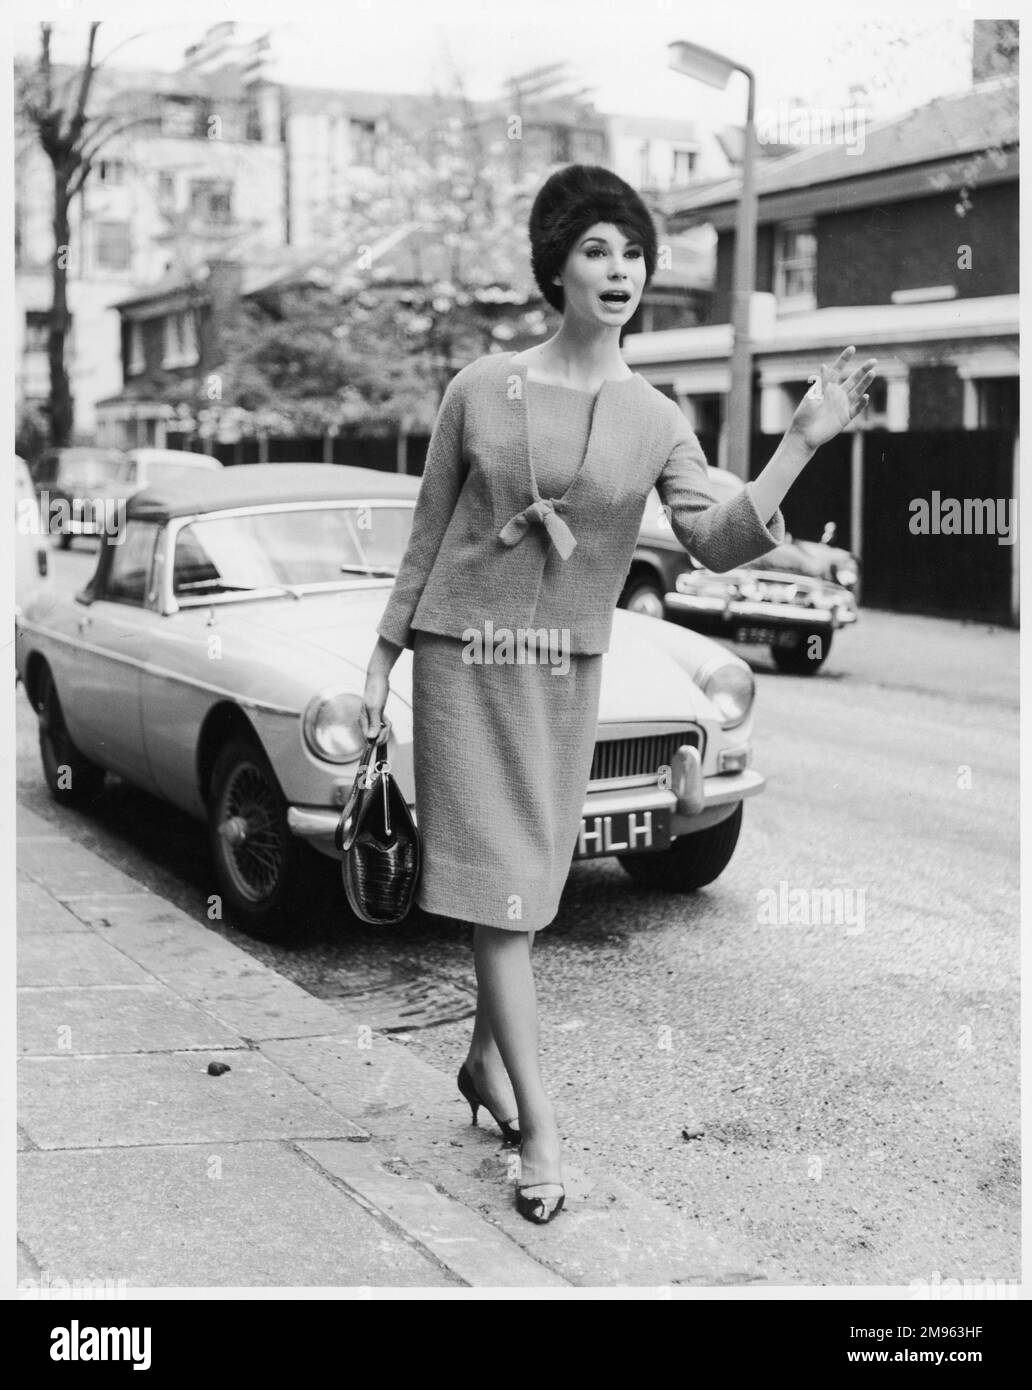 A woman in smart stylish suit of straight knee-length skirt & a collarless sac like short jacket with tie fastening, fur hat & stiletto heels hails a taxi. Stock Photo